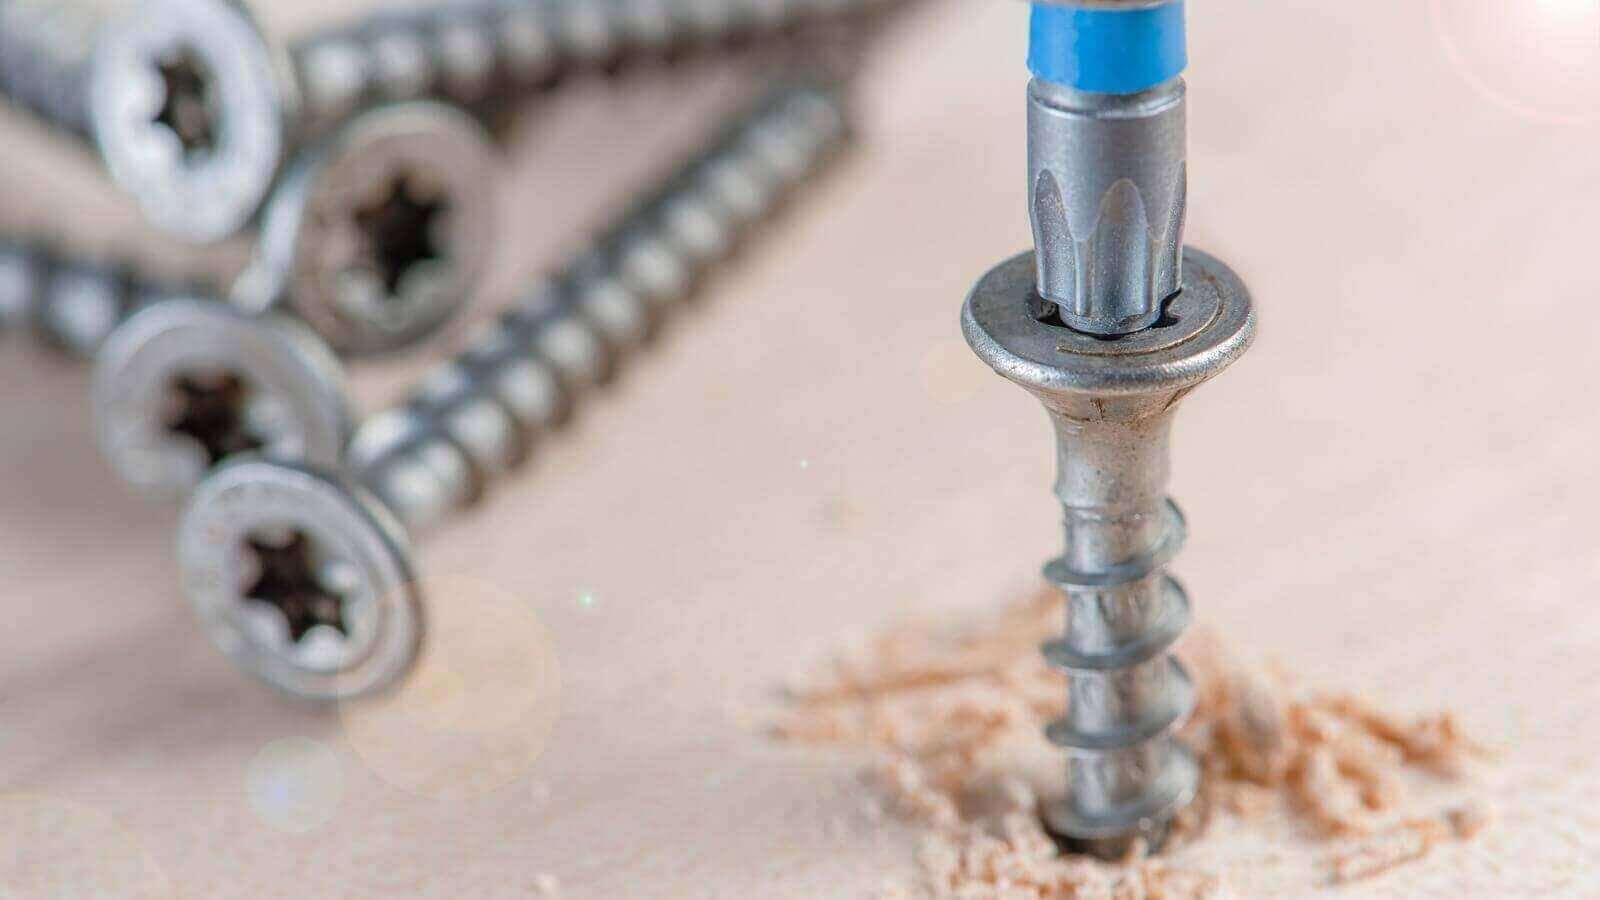 A screwdriver and screws in a wood

Description automatically generated